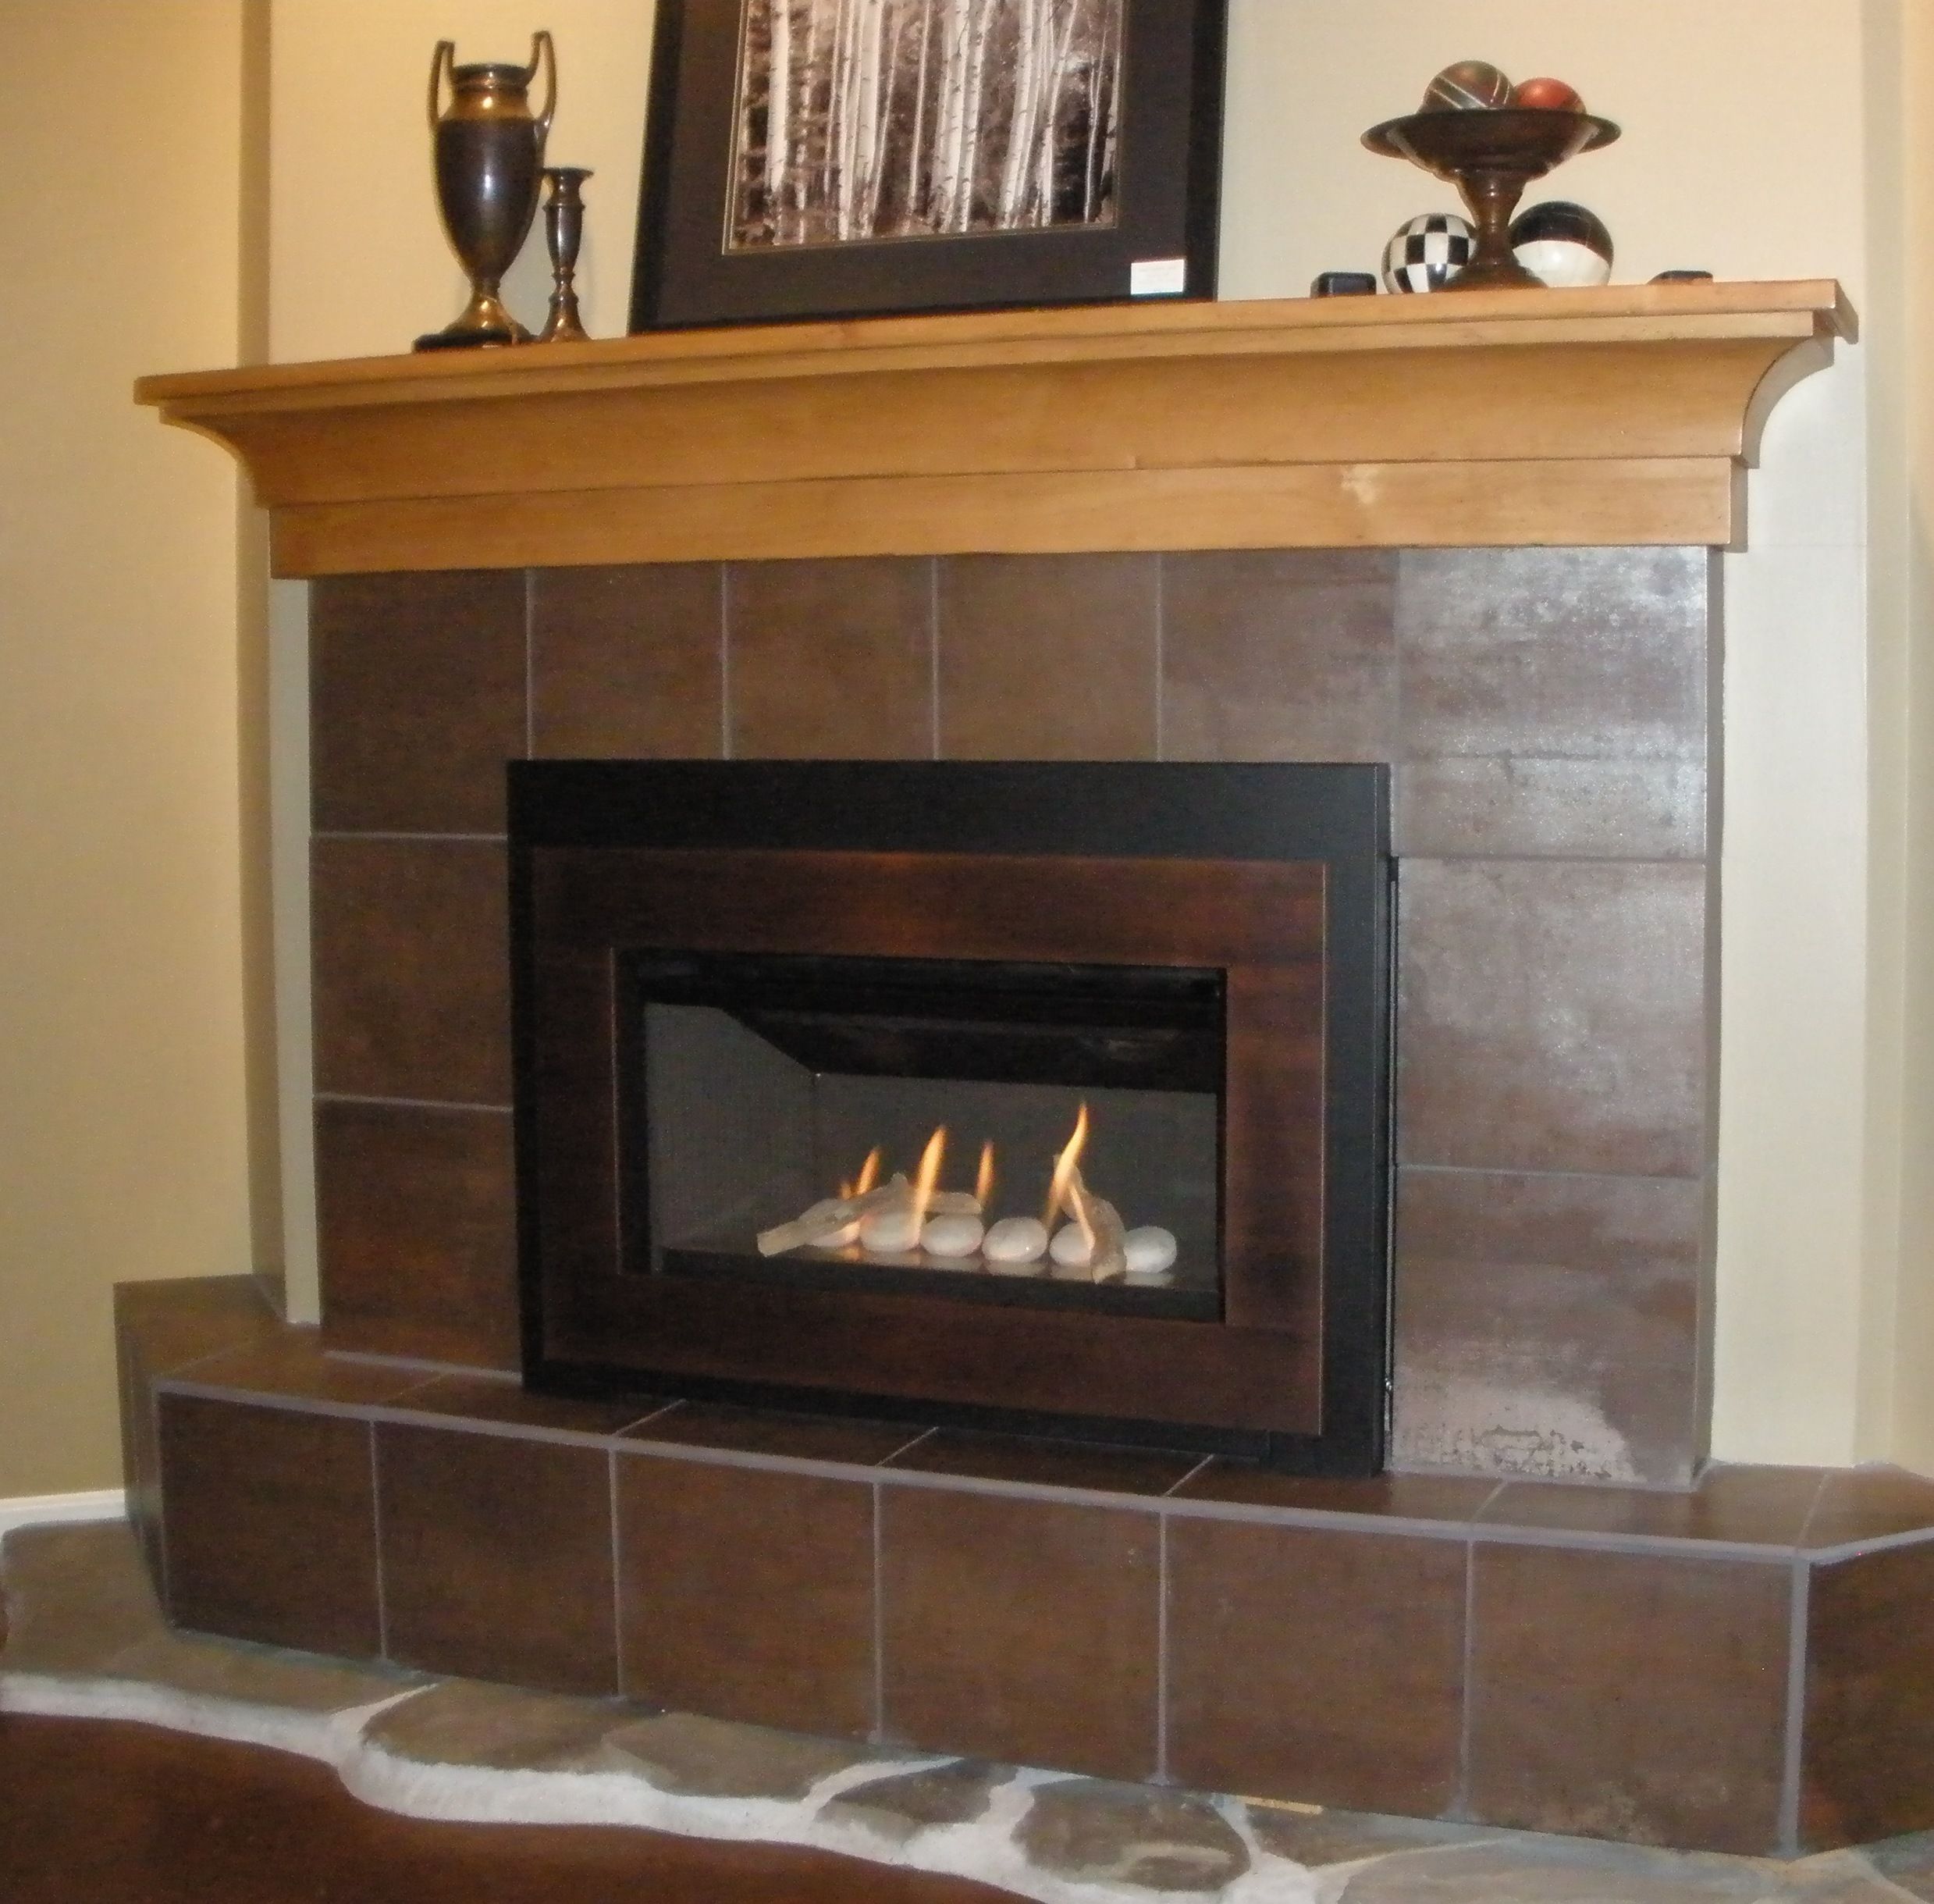 Gas Fireplaces for Sale Best Of Pin On Valor Radiant Gas Fireplaces Midwest Dealer